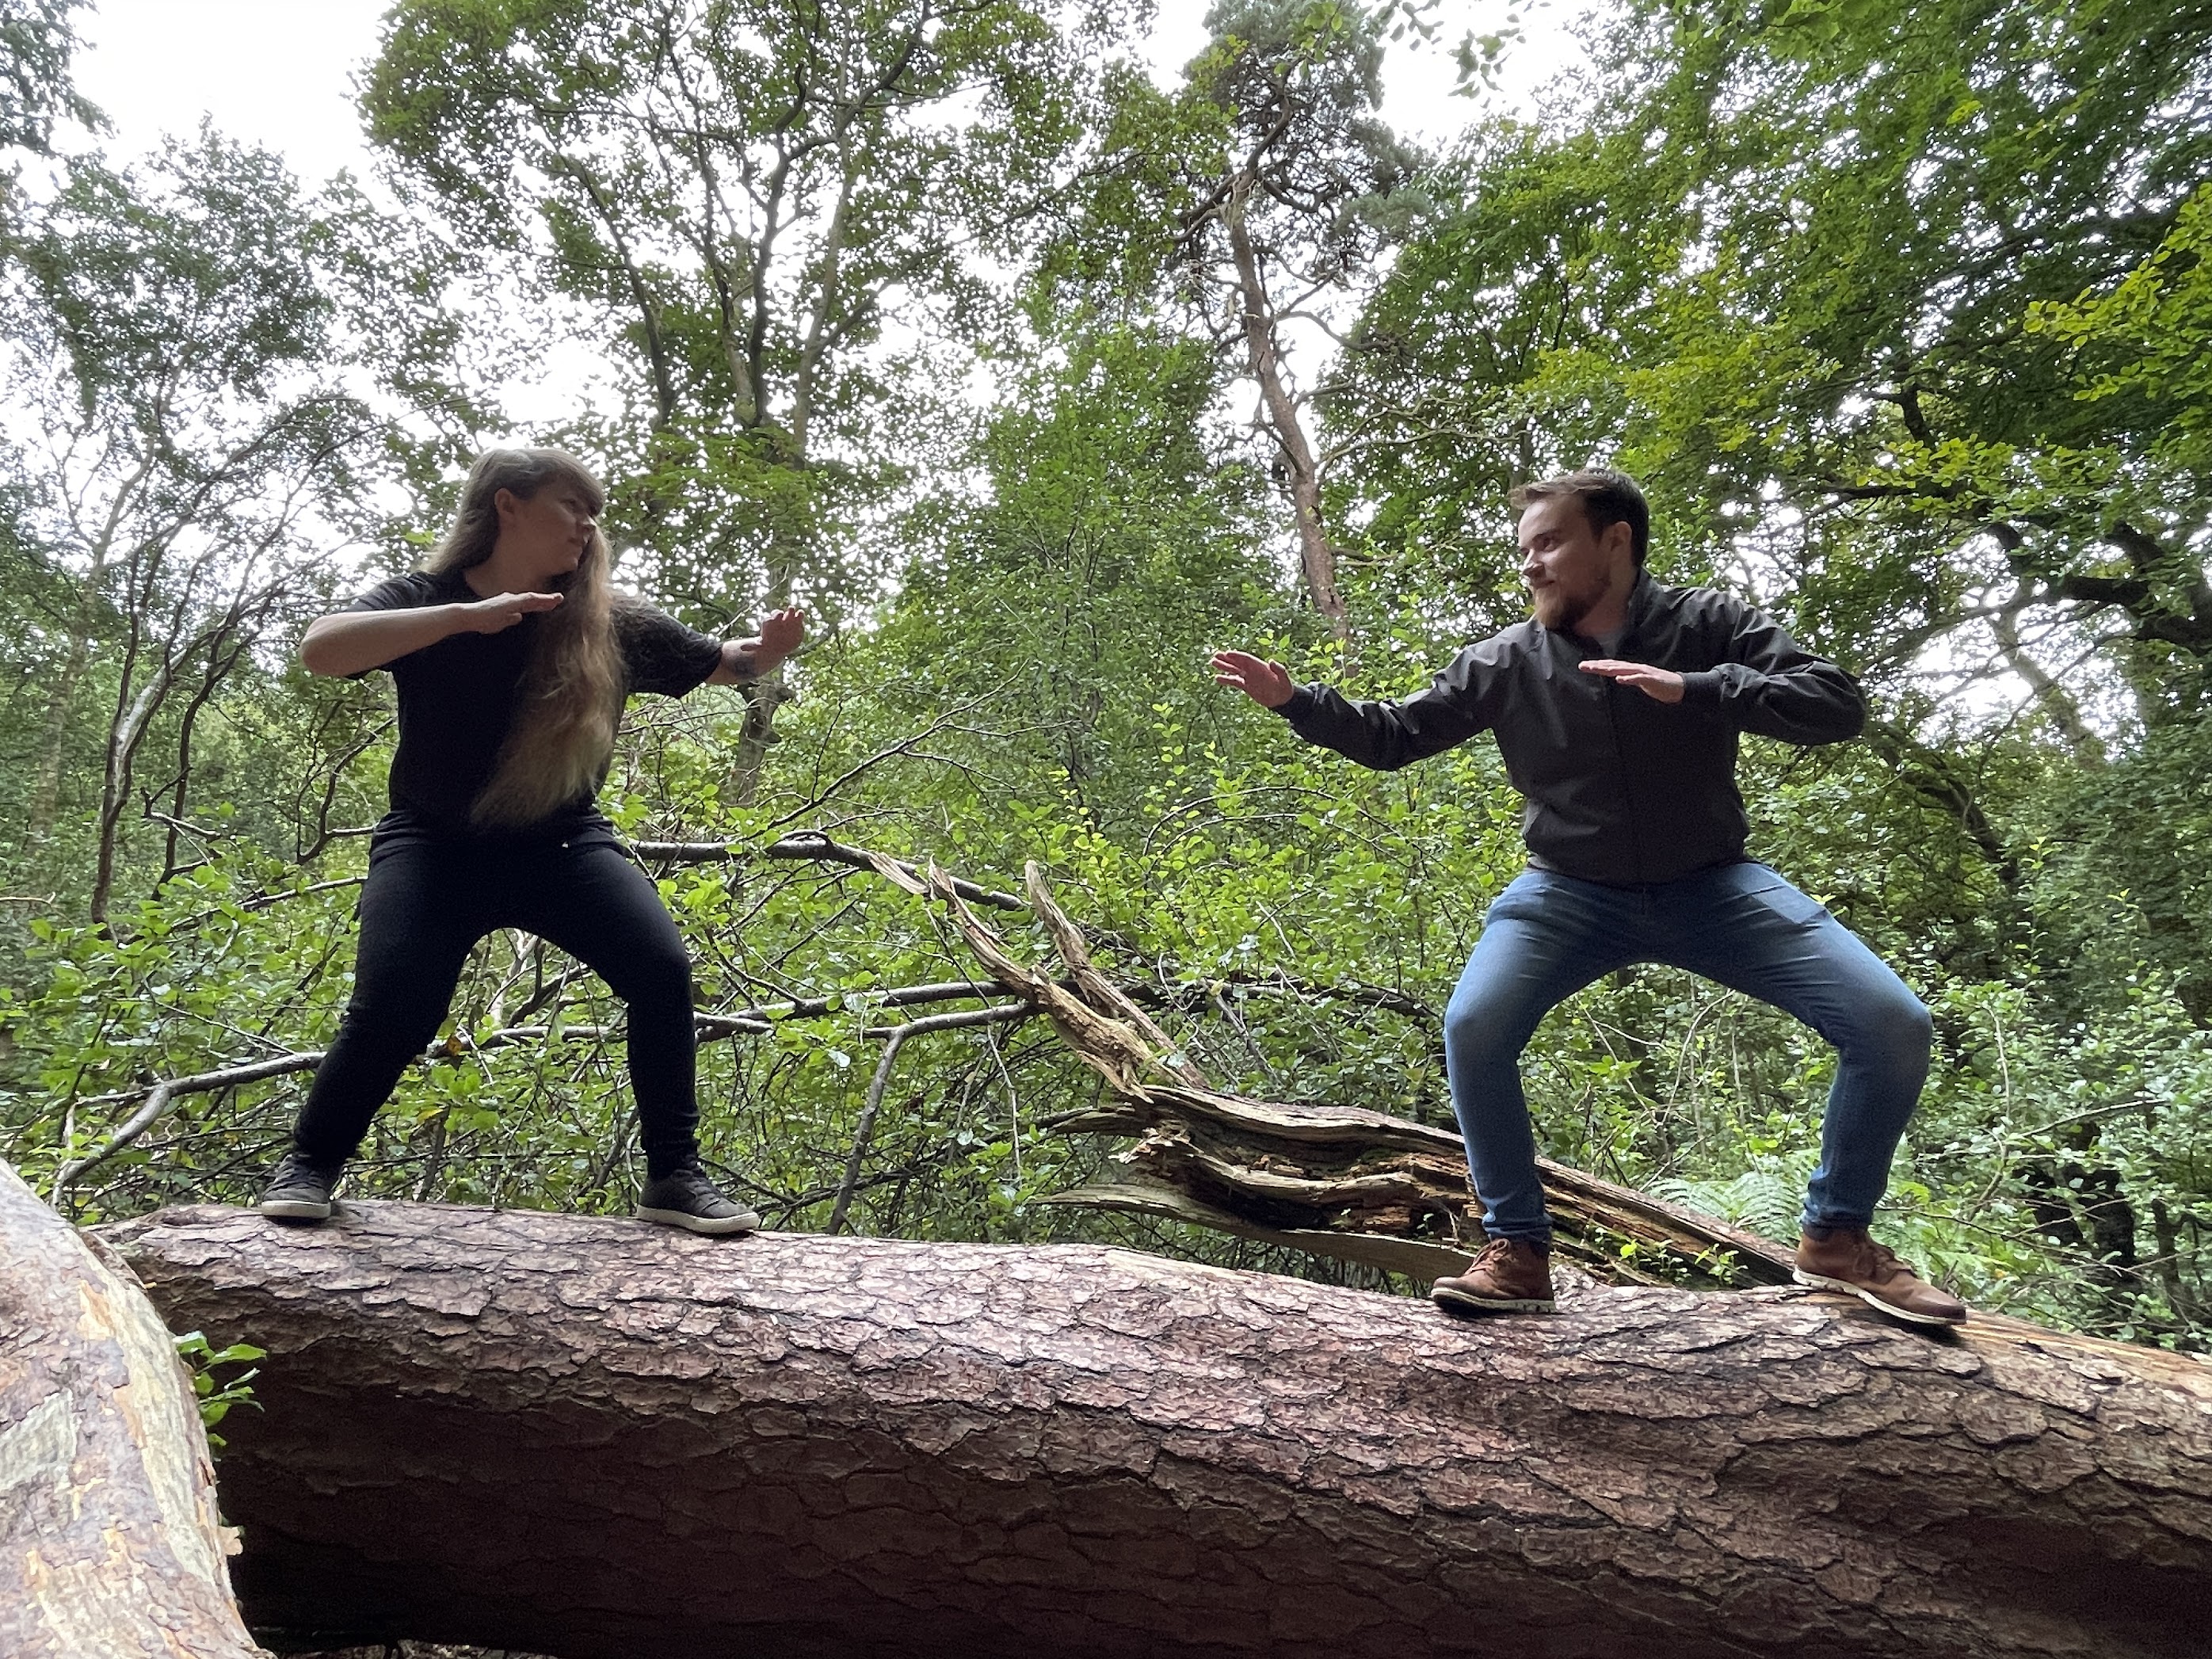 A photo of my friends Katie & Ashley on top of a fallen down tree pretending to be fighting